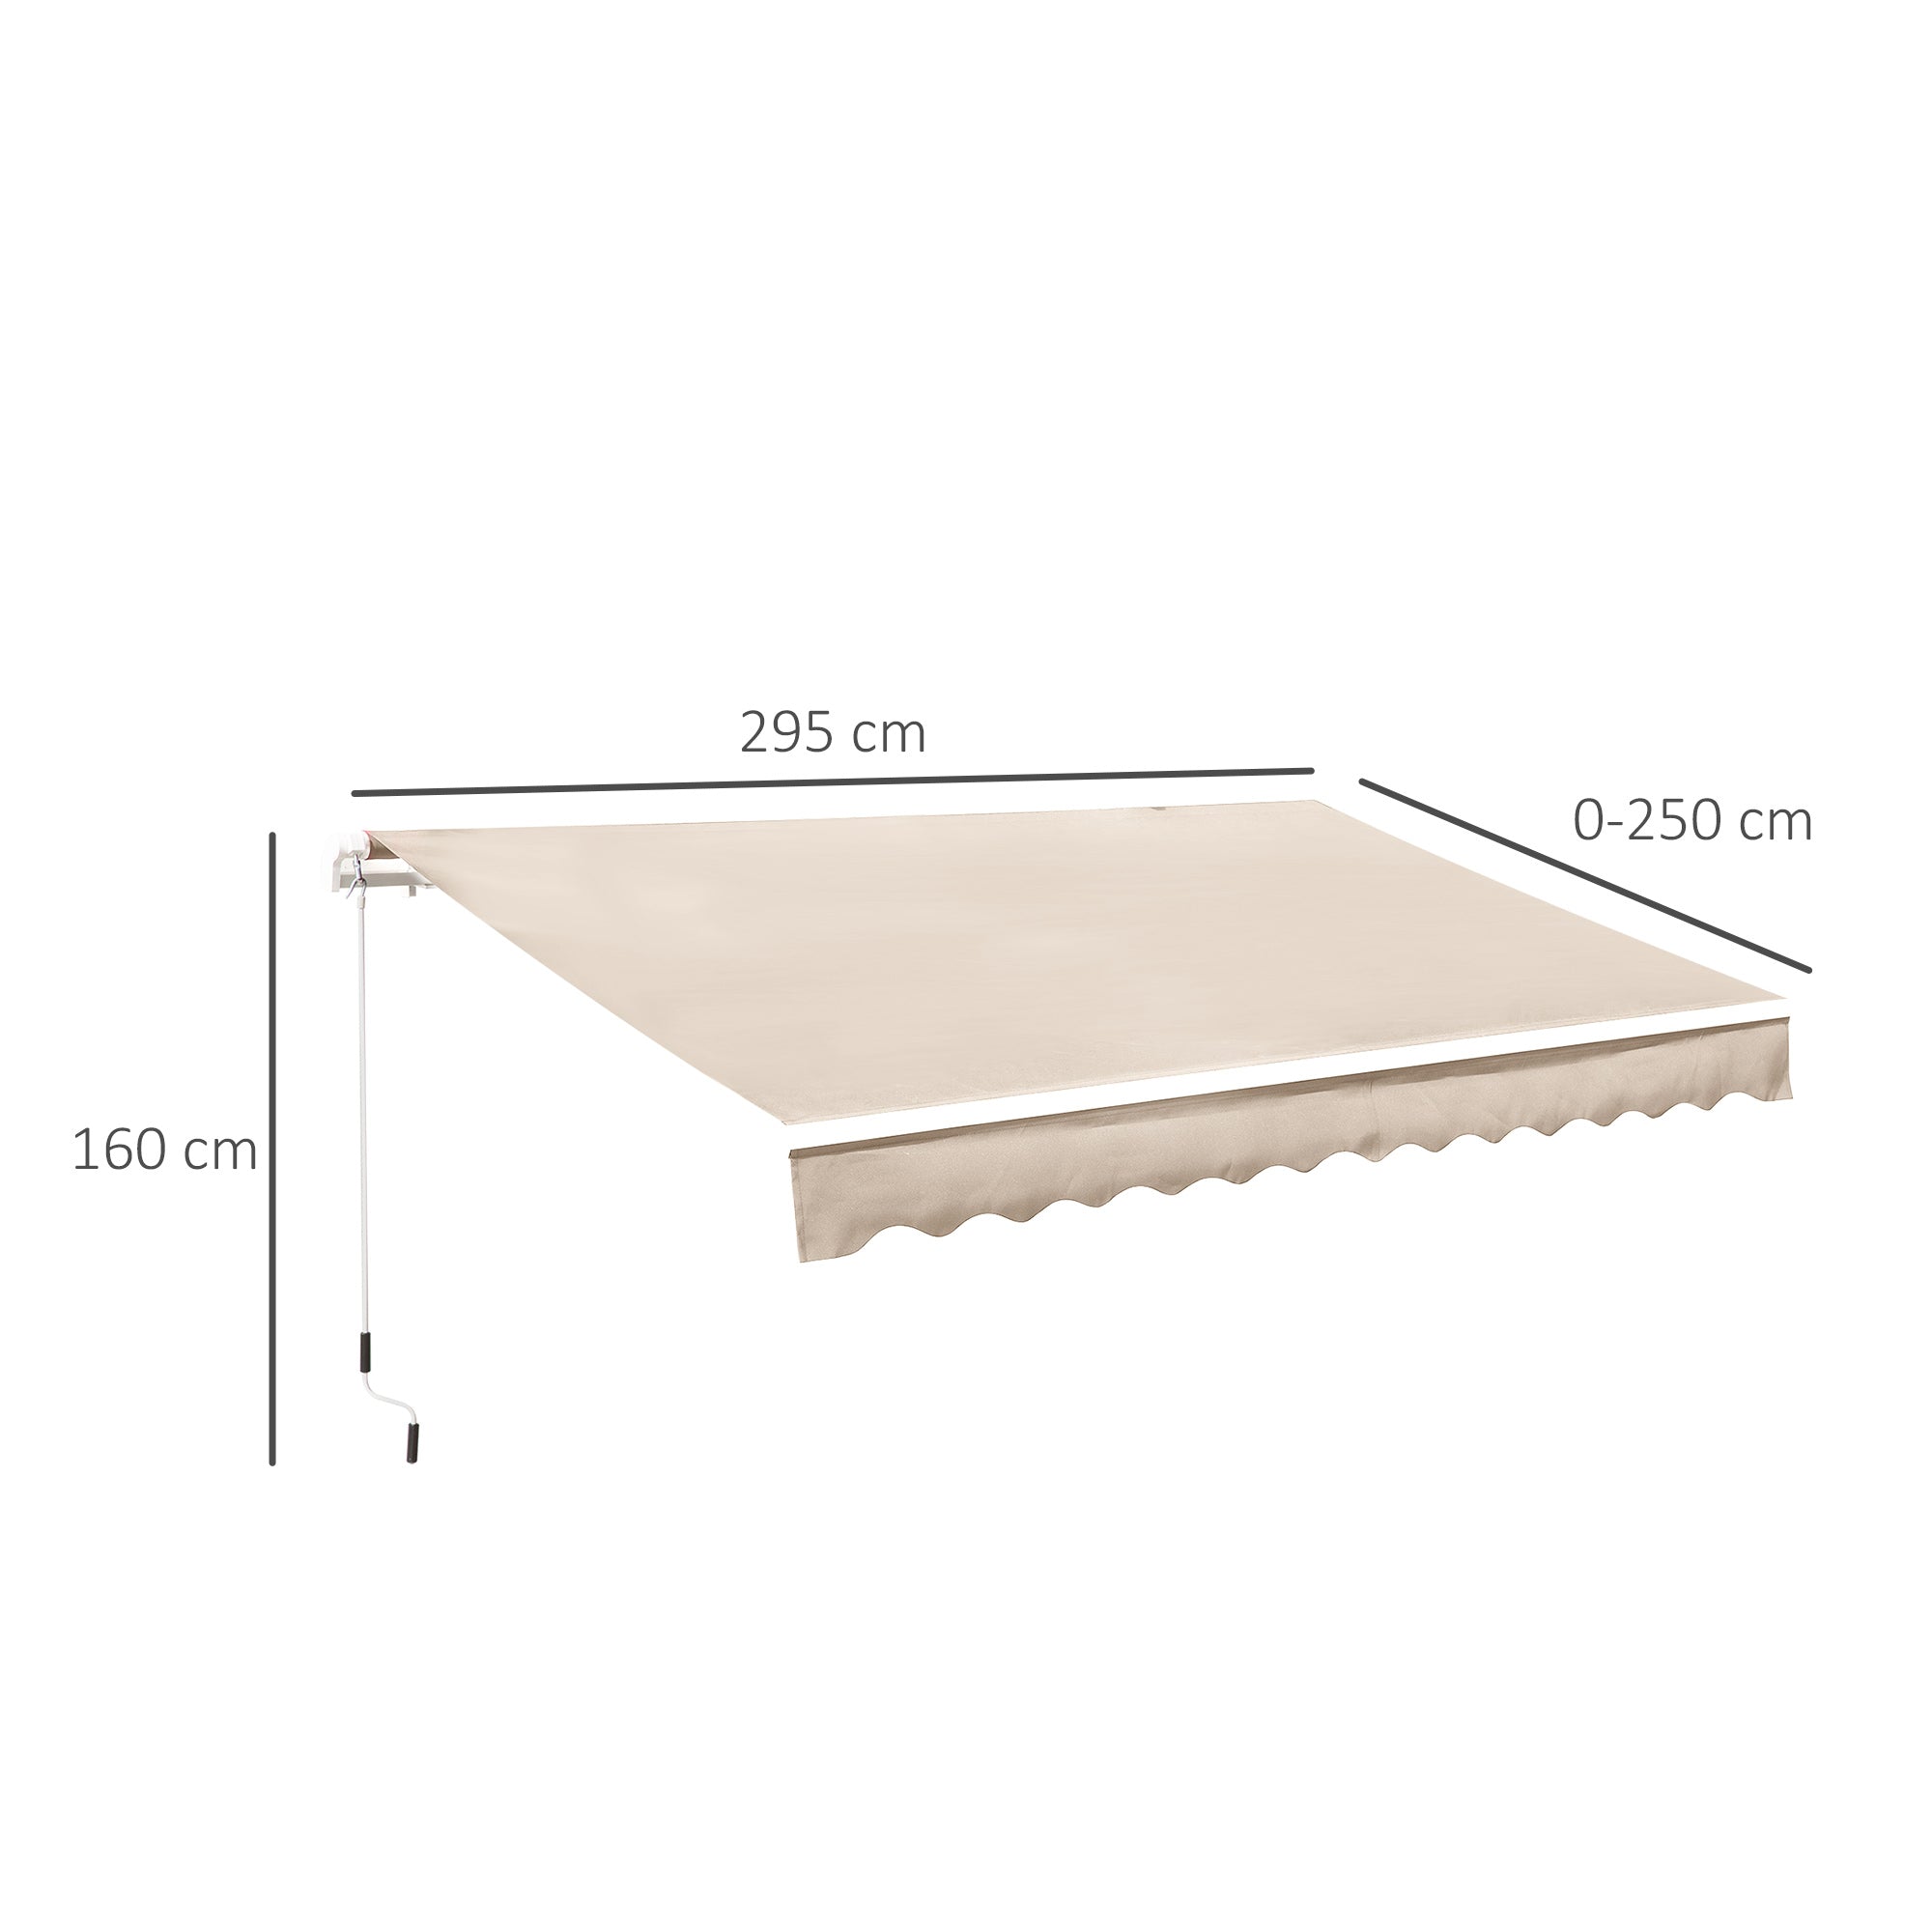 Outsunny 3 x 2.5m Garden Patio Manual Awning Canopy Sun Shade Shelter with Winding Handle Retractable - Cream White - Inspirely